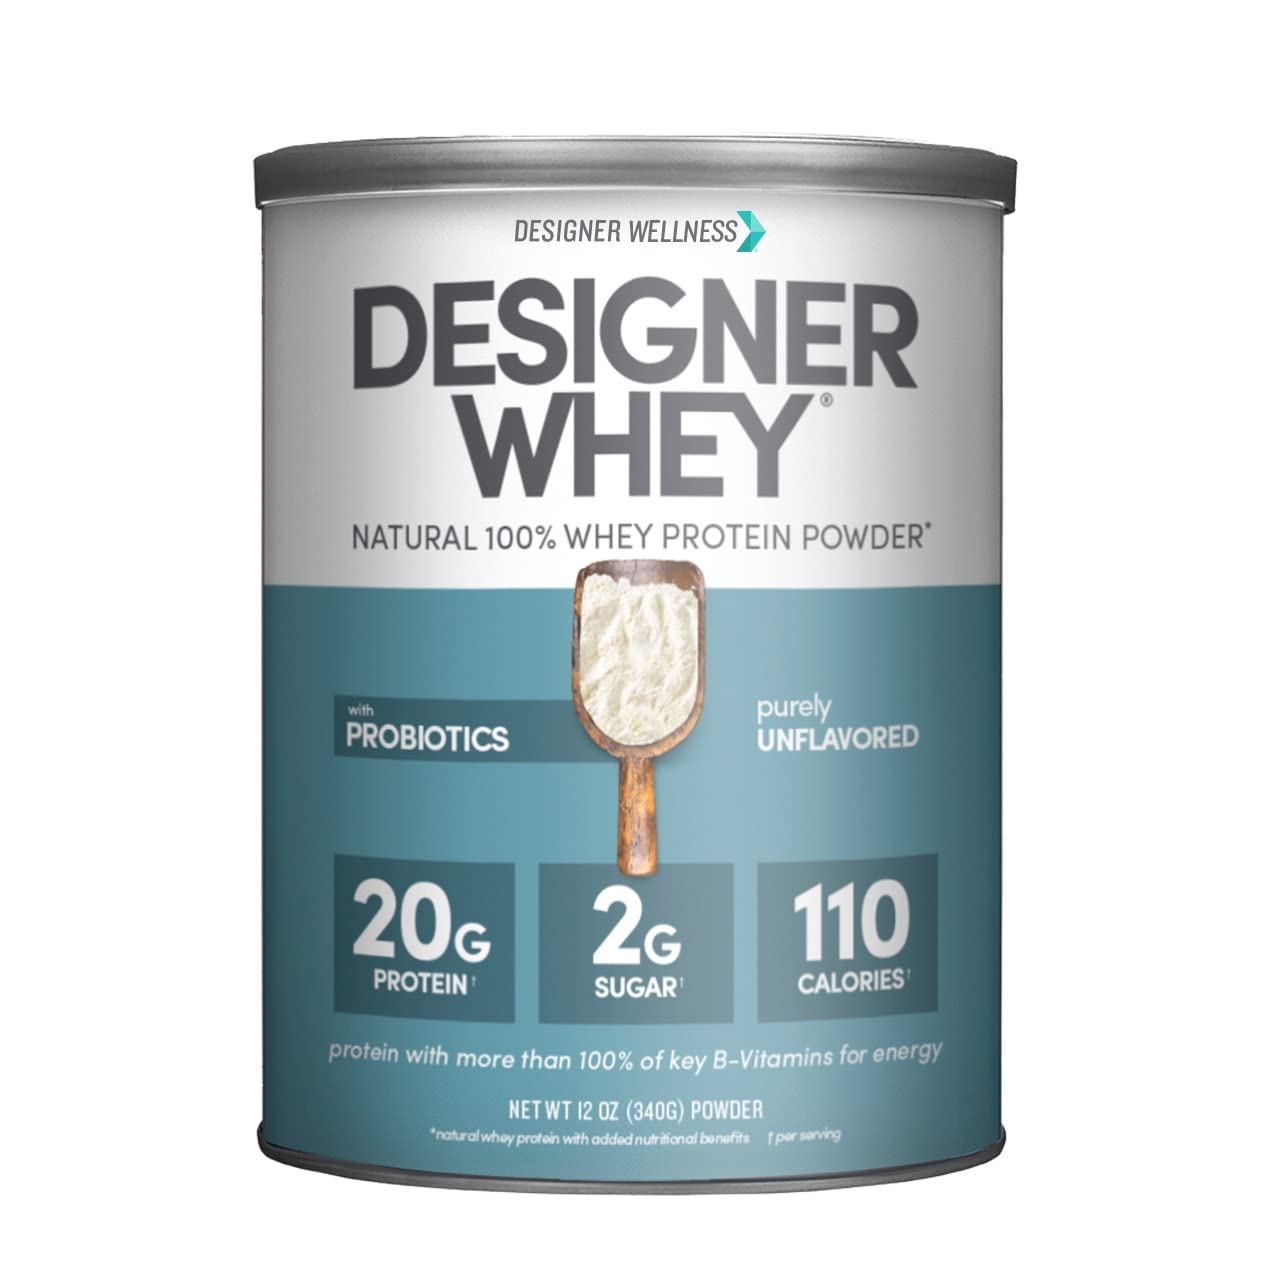 Book Cover Designer Wellness Designer Whey Natural 100% Whey Protein Powder with Probiotics , Fiber, and Key B-Vitamins for Energy, Gluten-free, Non-GMO, Purely Unflavored 12 oz